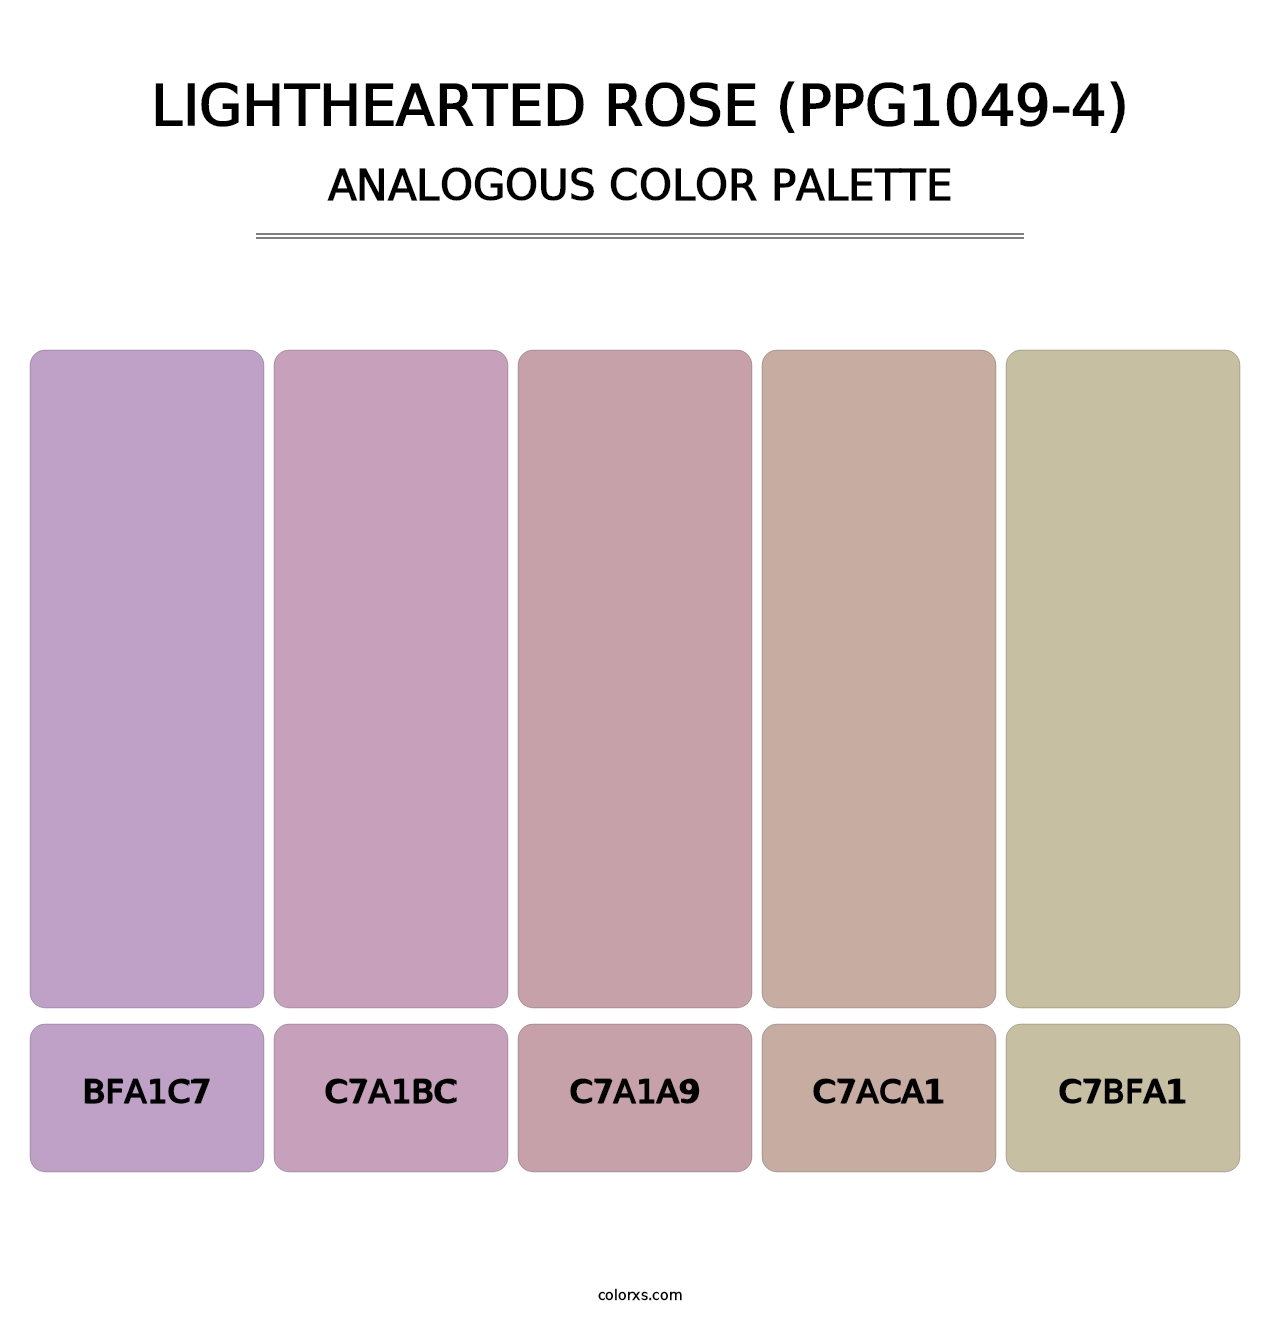 Lighthearted Rose (PPG1049-4) - Analogous Color Palette